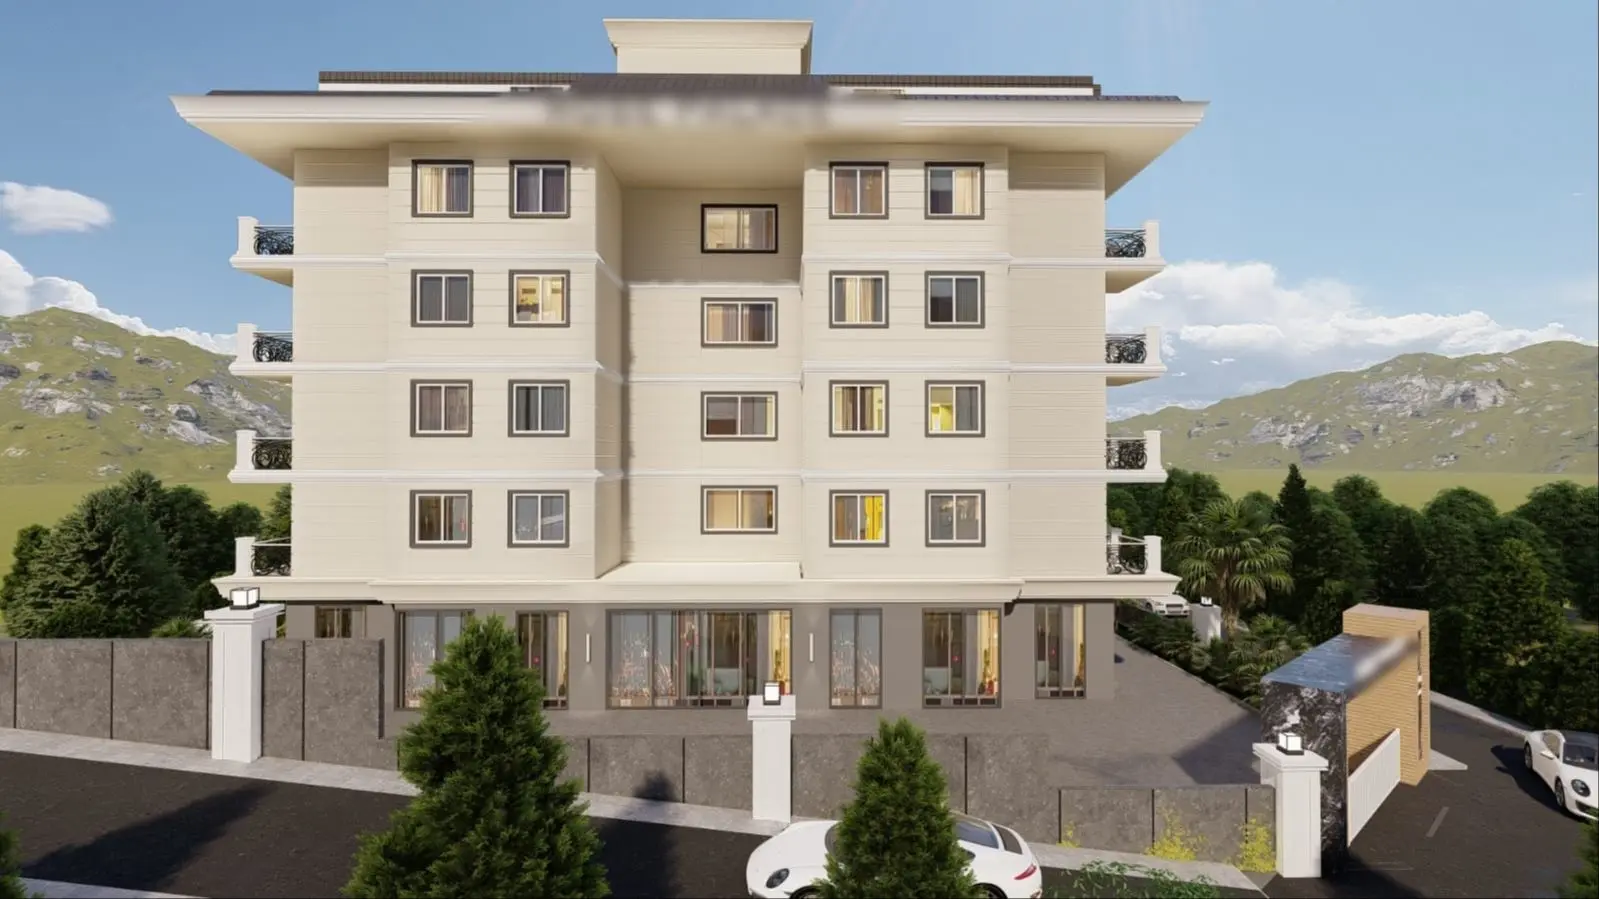 NEW BOUTIQUE HOUSING PROJECT IN DEMIRTAŞ DISTRICT